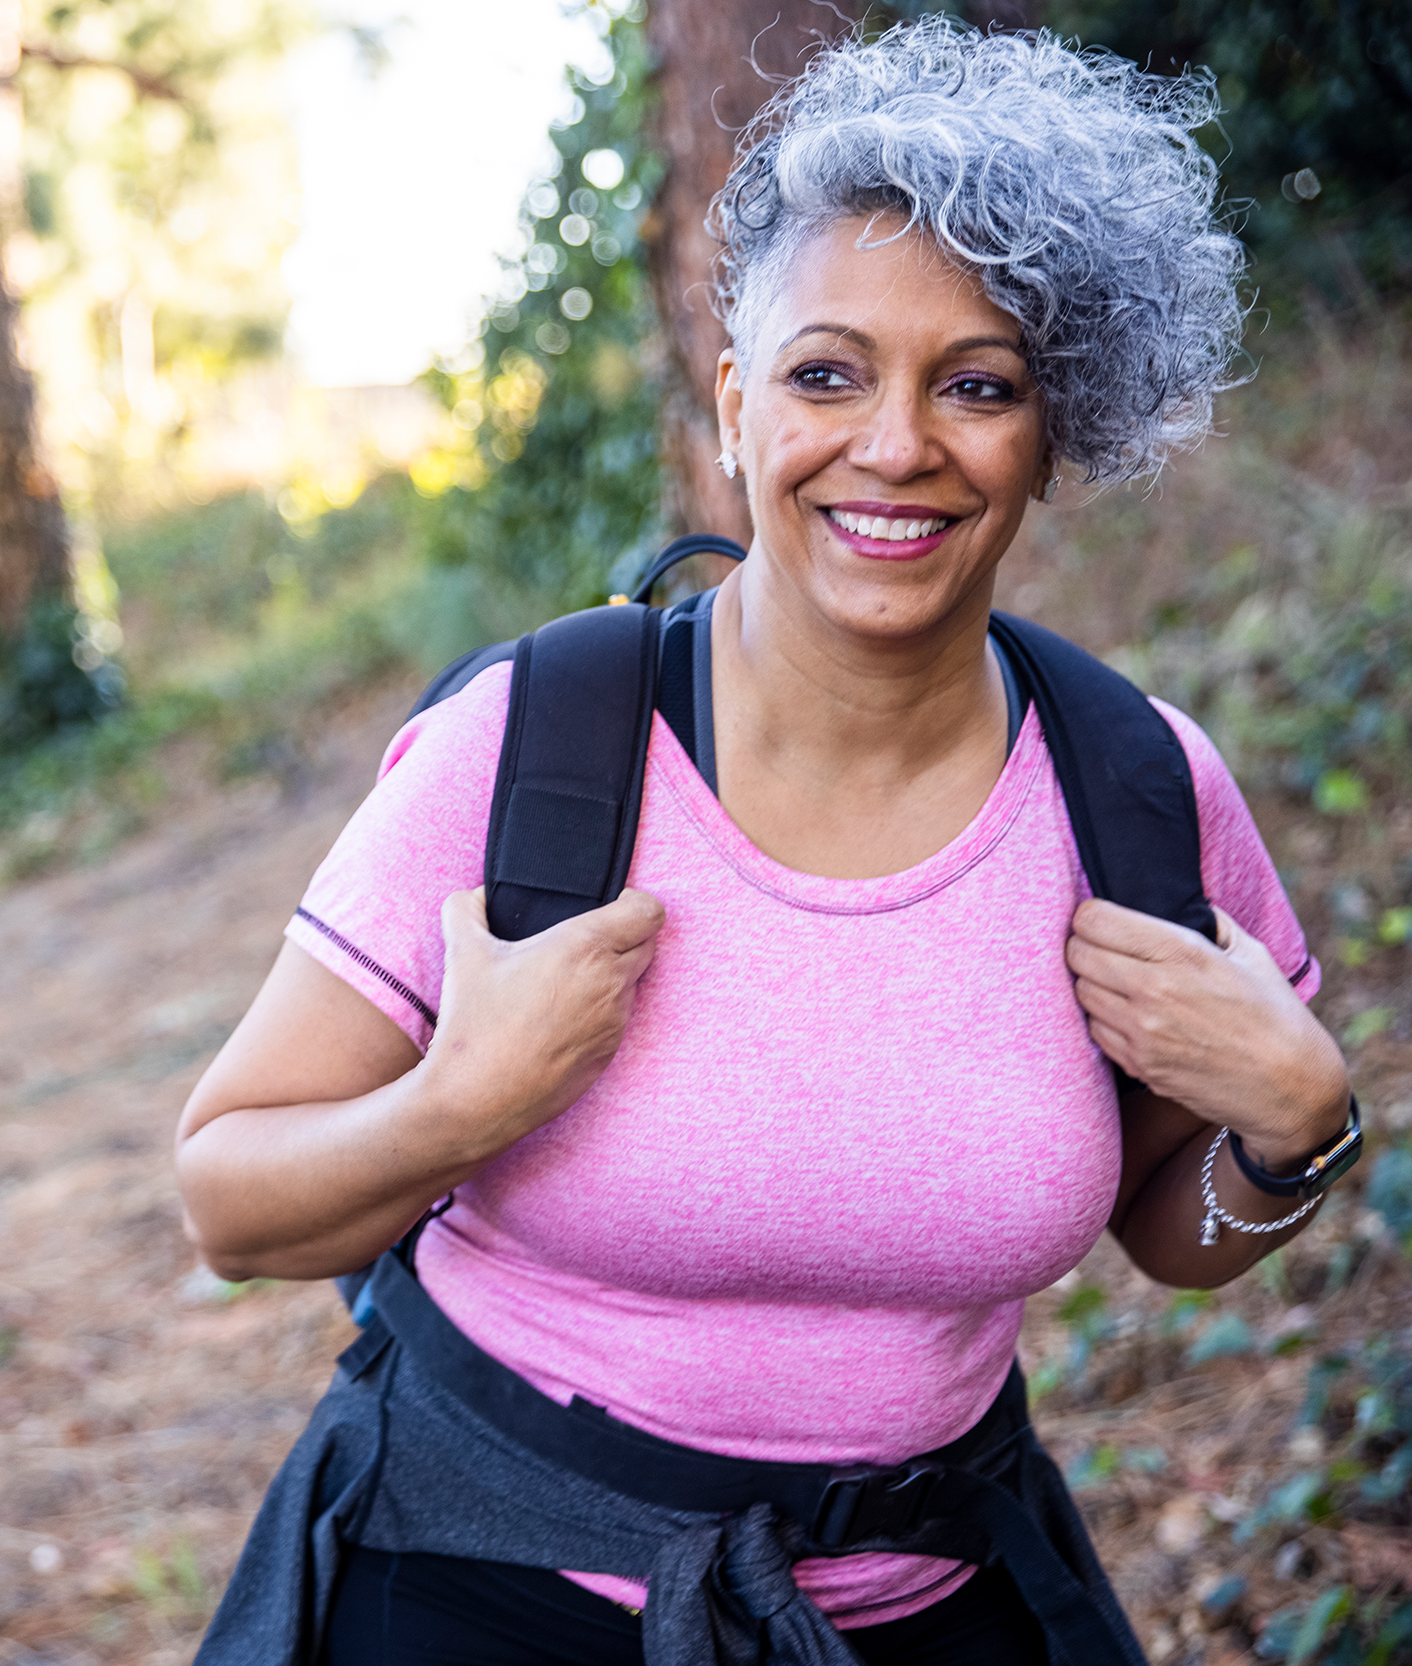 A smiling older woman goes on a hike.